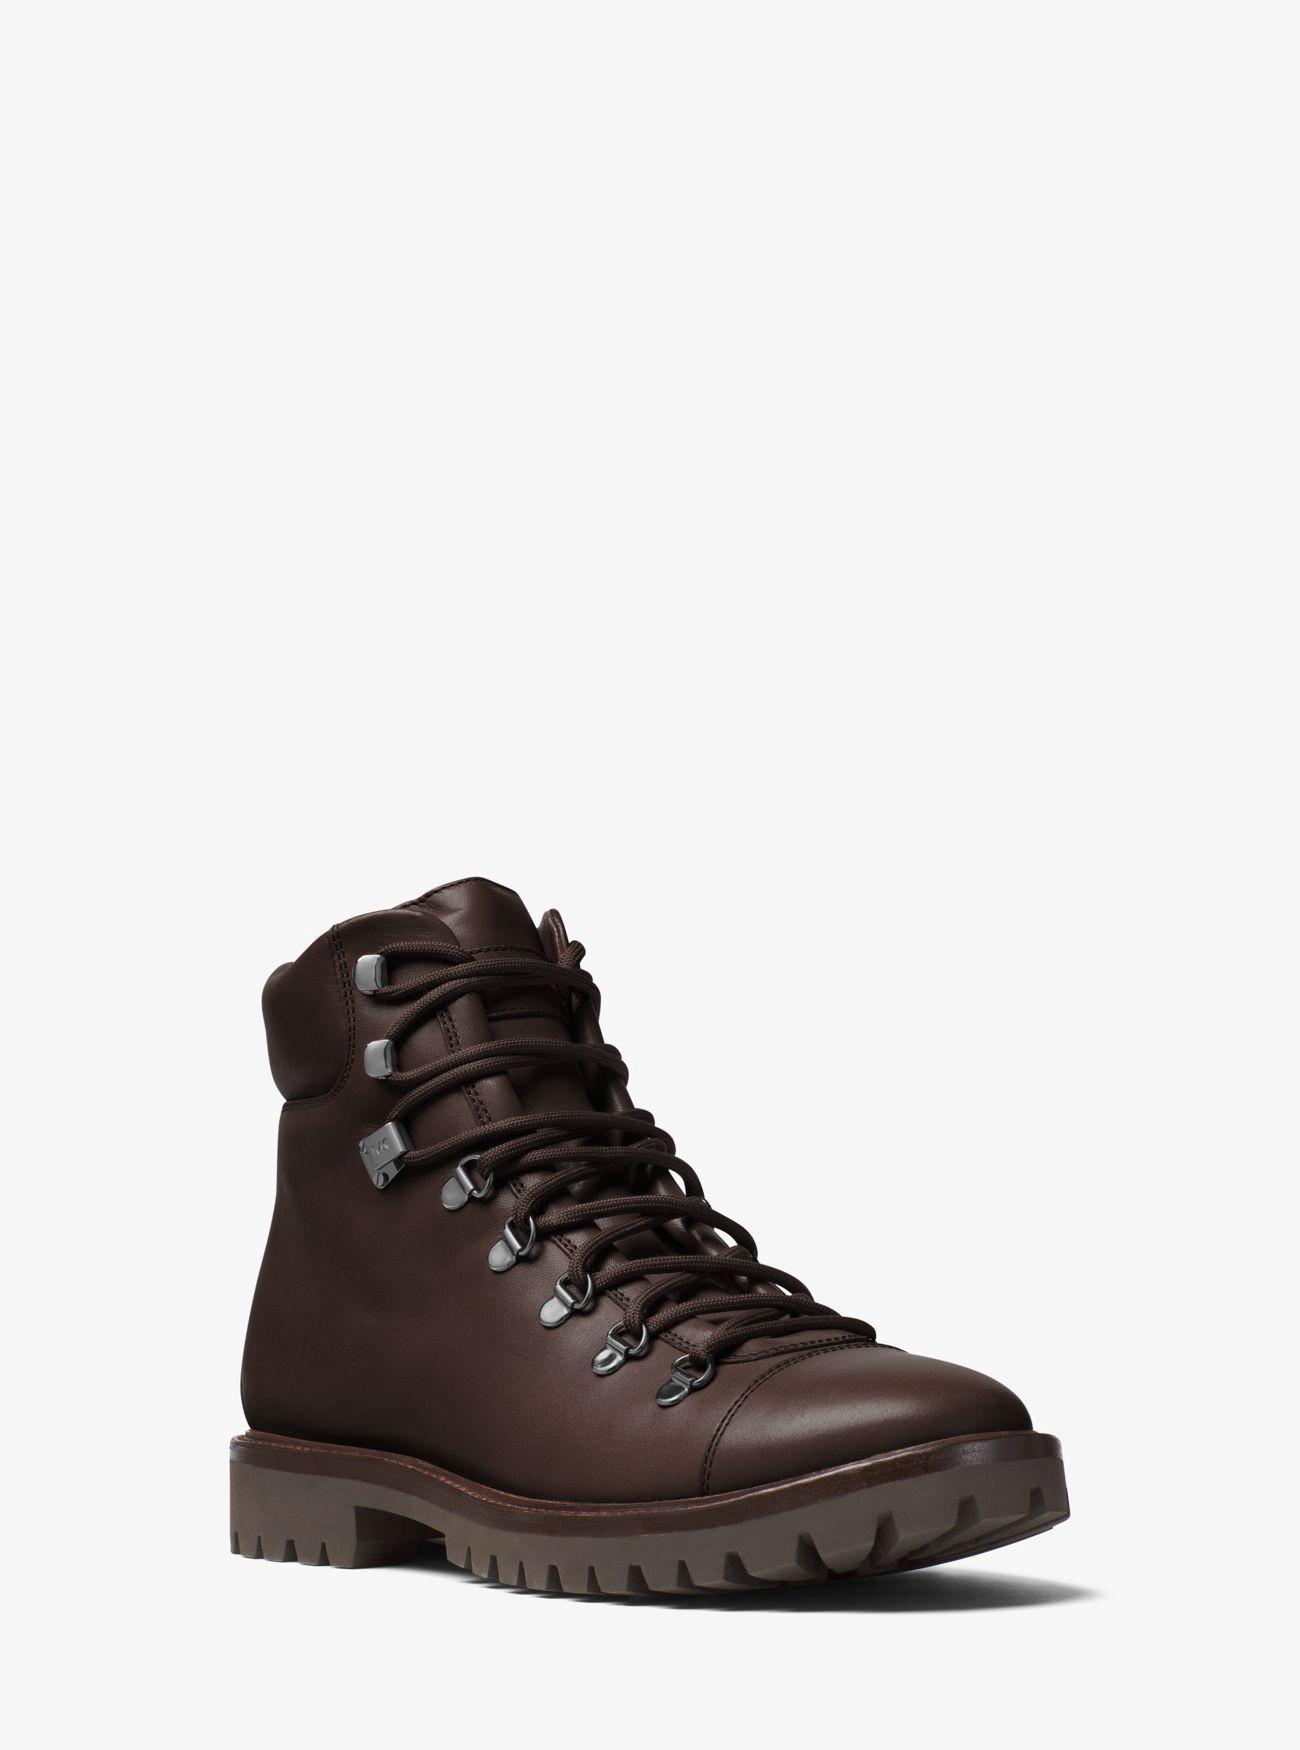 Michael Kors Lance Leather Hiking Boot In Brown | ModeSens